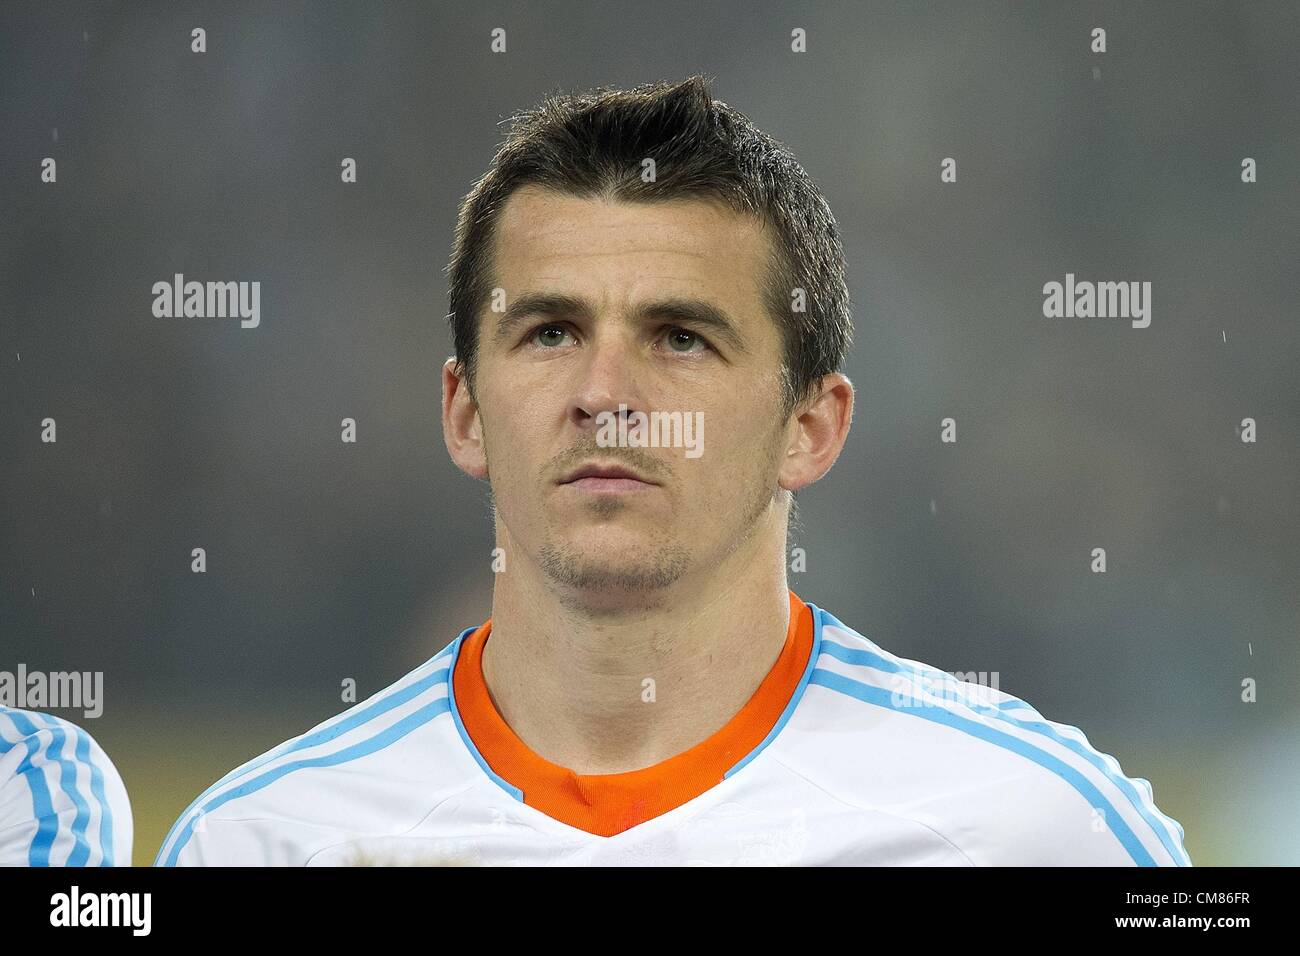 25.10.2012 Moenchengladbach, Germany. Joey Barton before the the Europa League game between Borussia Moenchengladbach and Olympique Marseille from the Borussia Park Stadium. Stock Photo